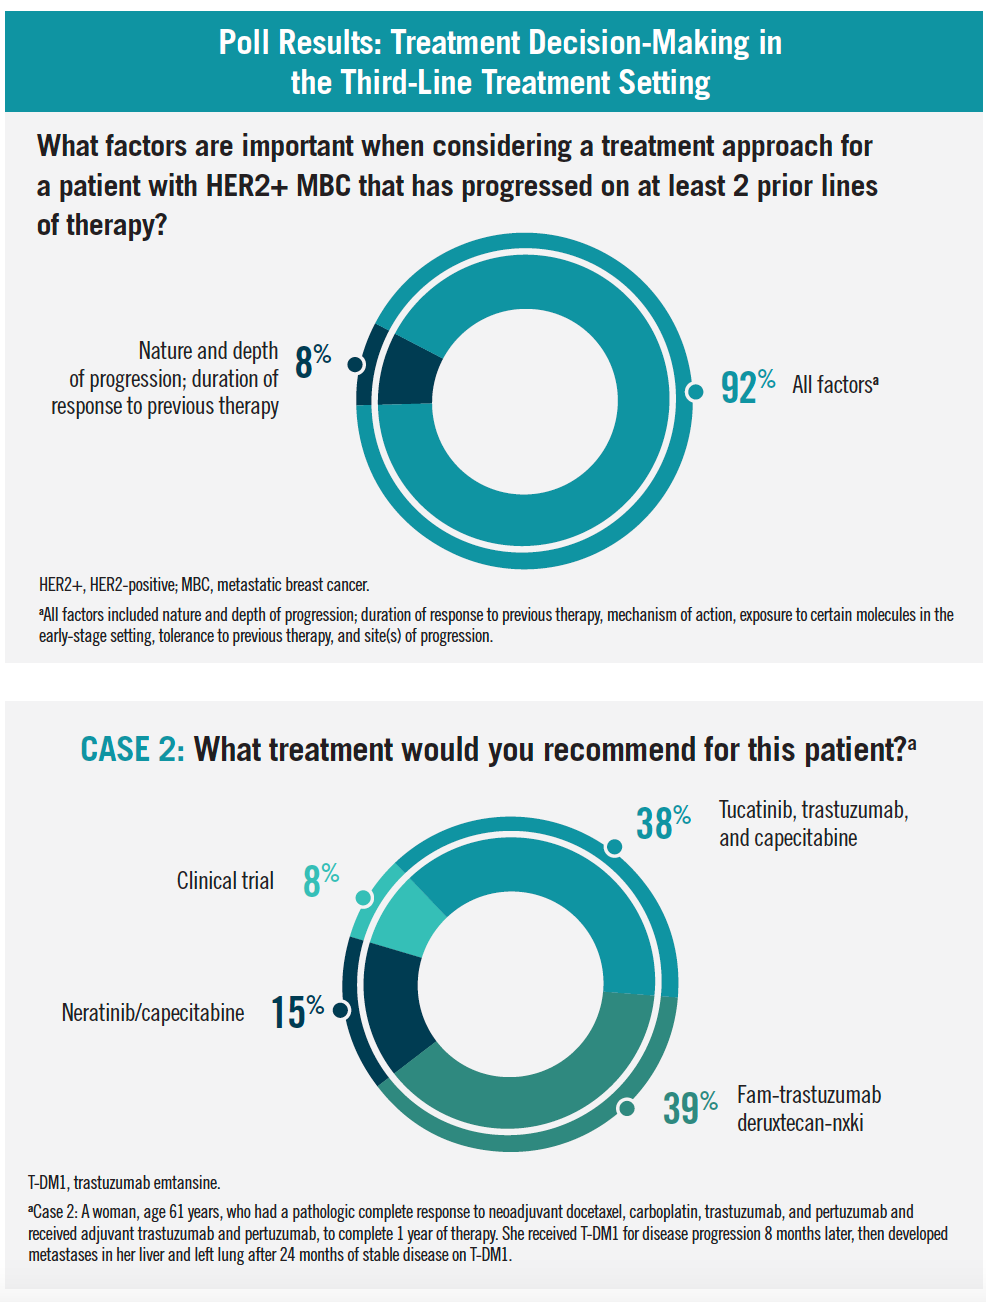 Poll Results: Treatment Decision-Making in the Third-Line Treatment Setting